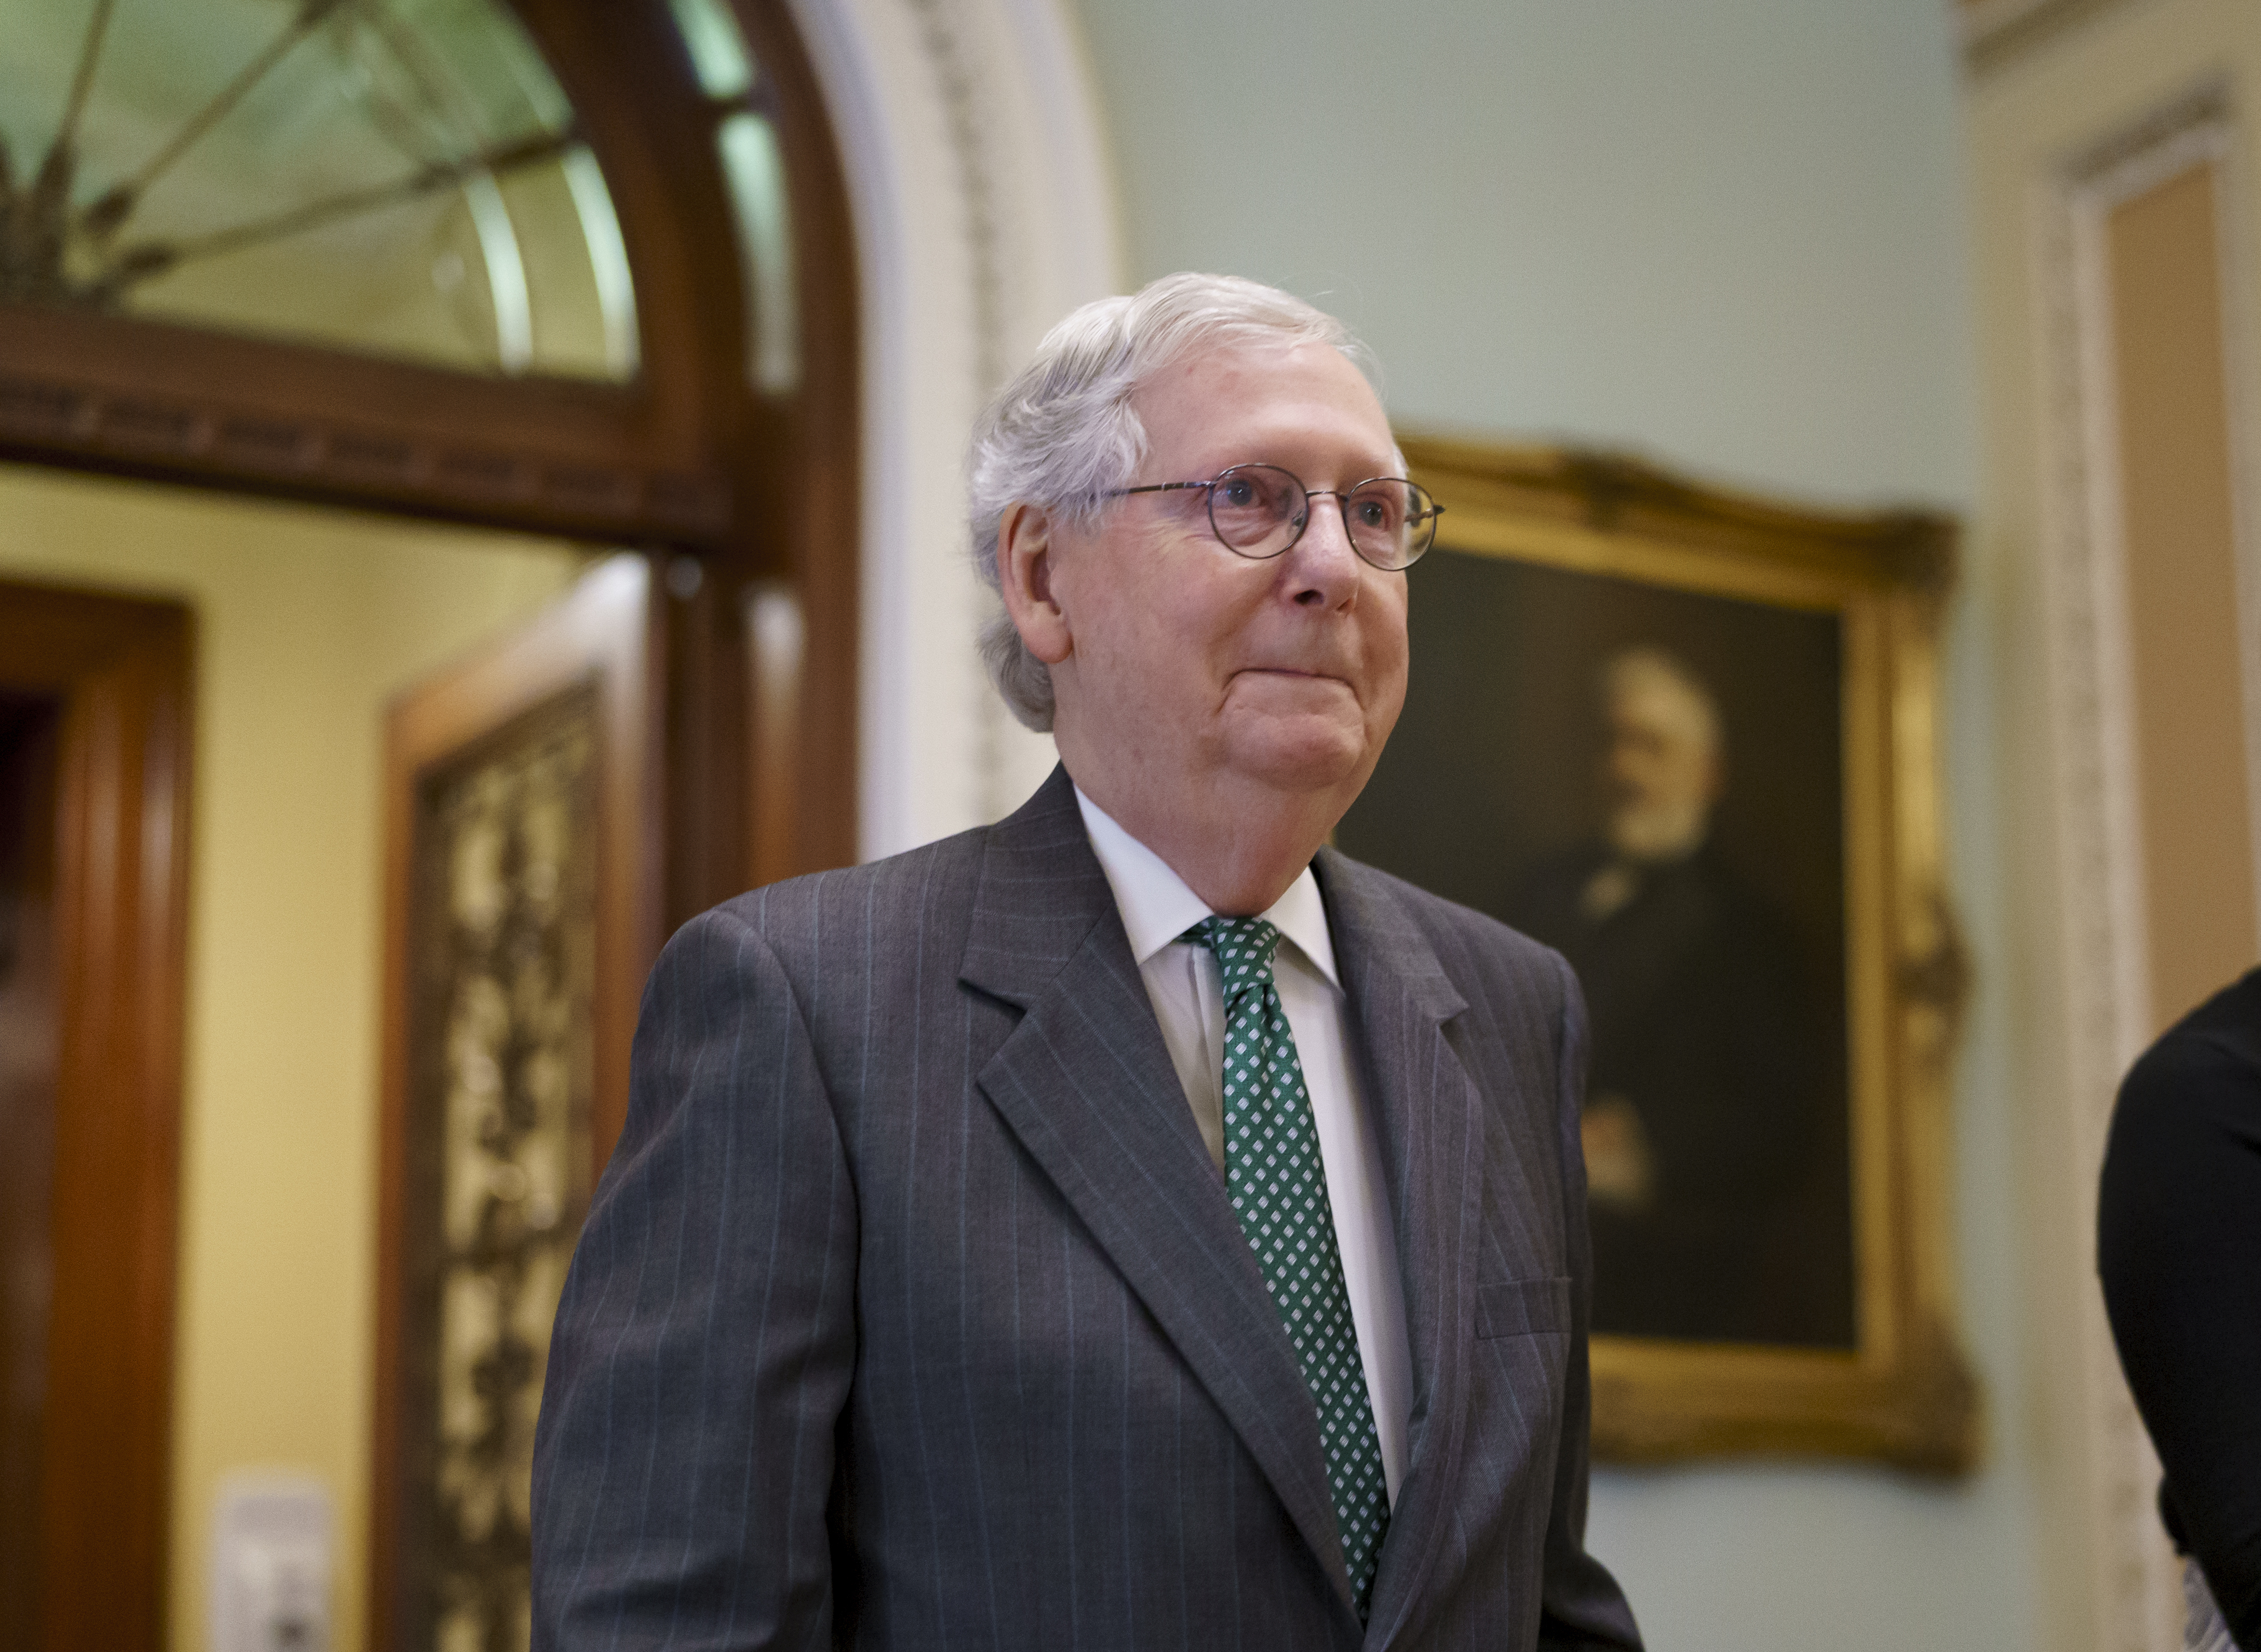 Mitch McConnell Hospitalized After Fall at DC Hotel